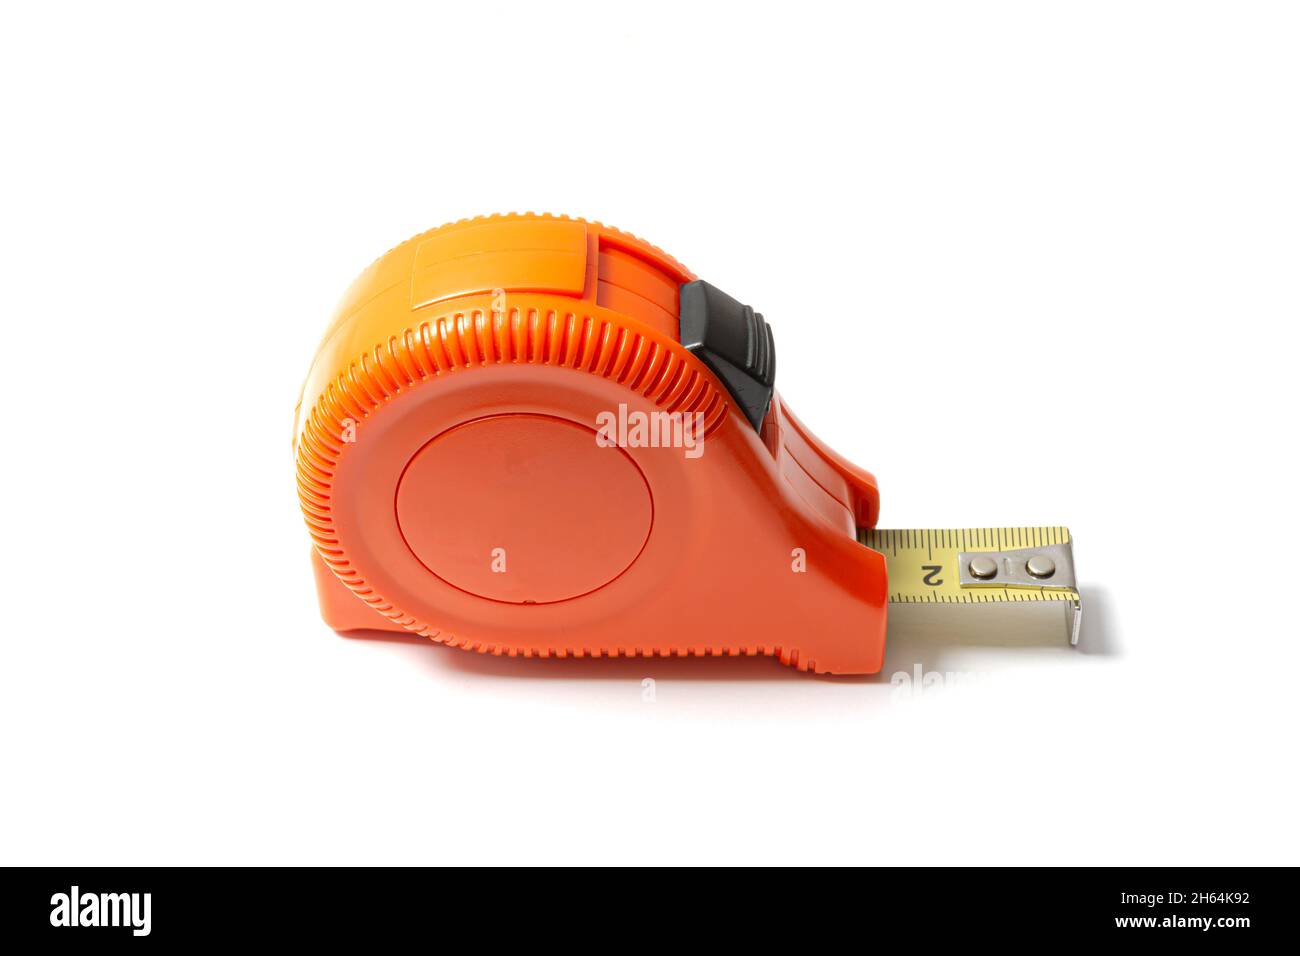 Measuring tape isolated on white background Stock Photo